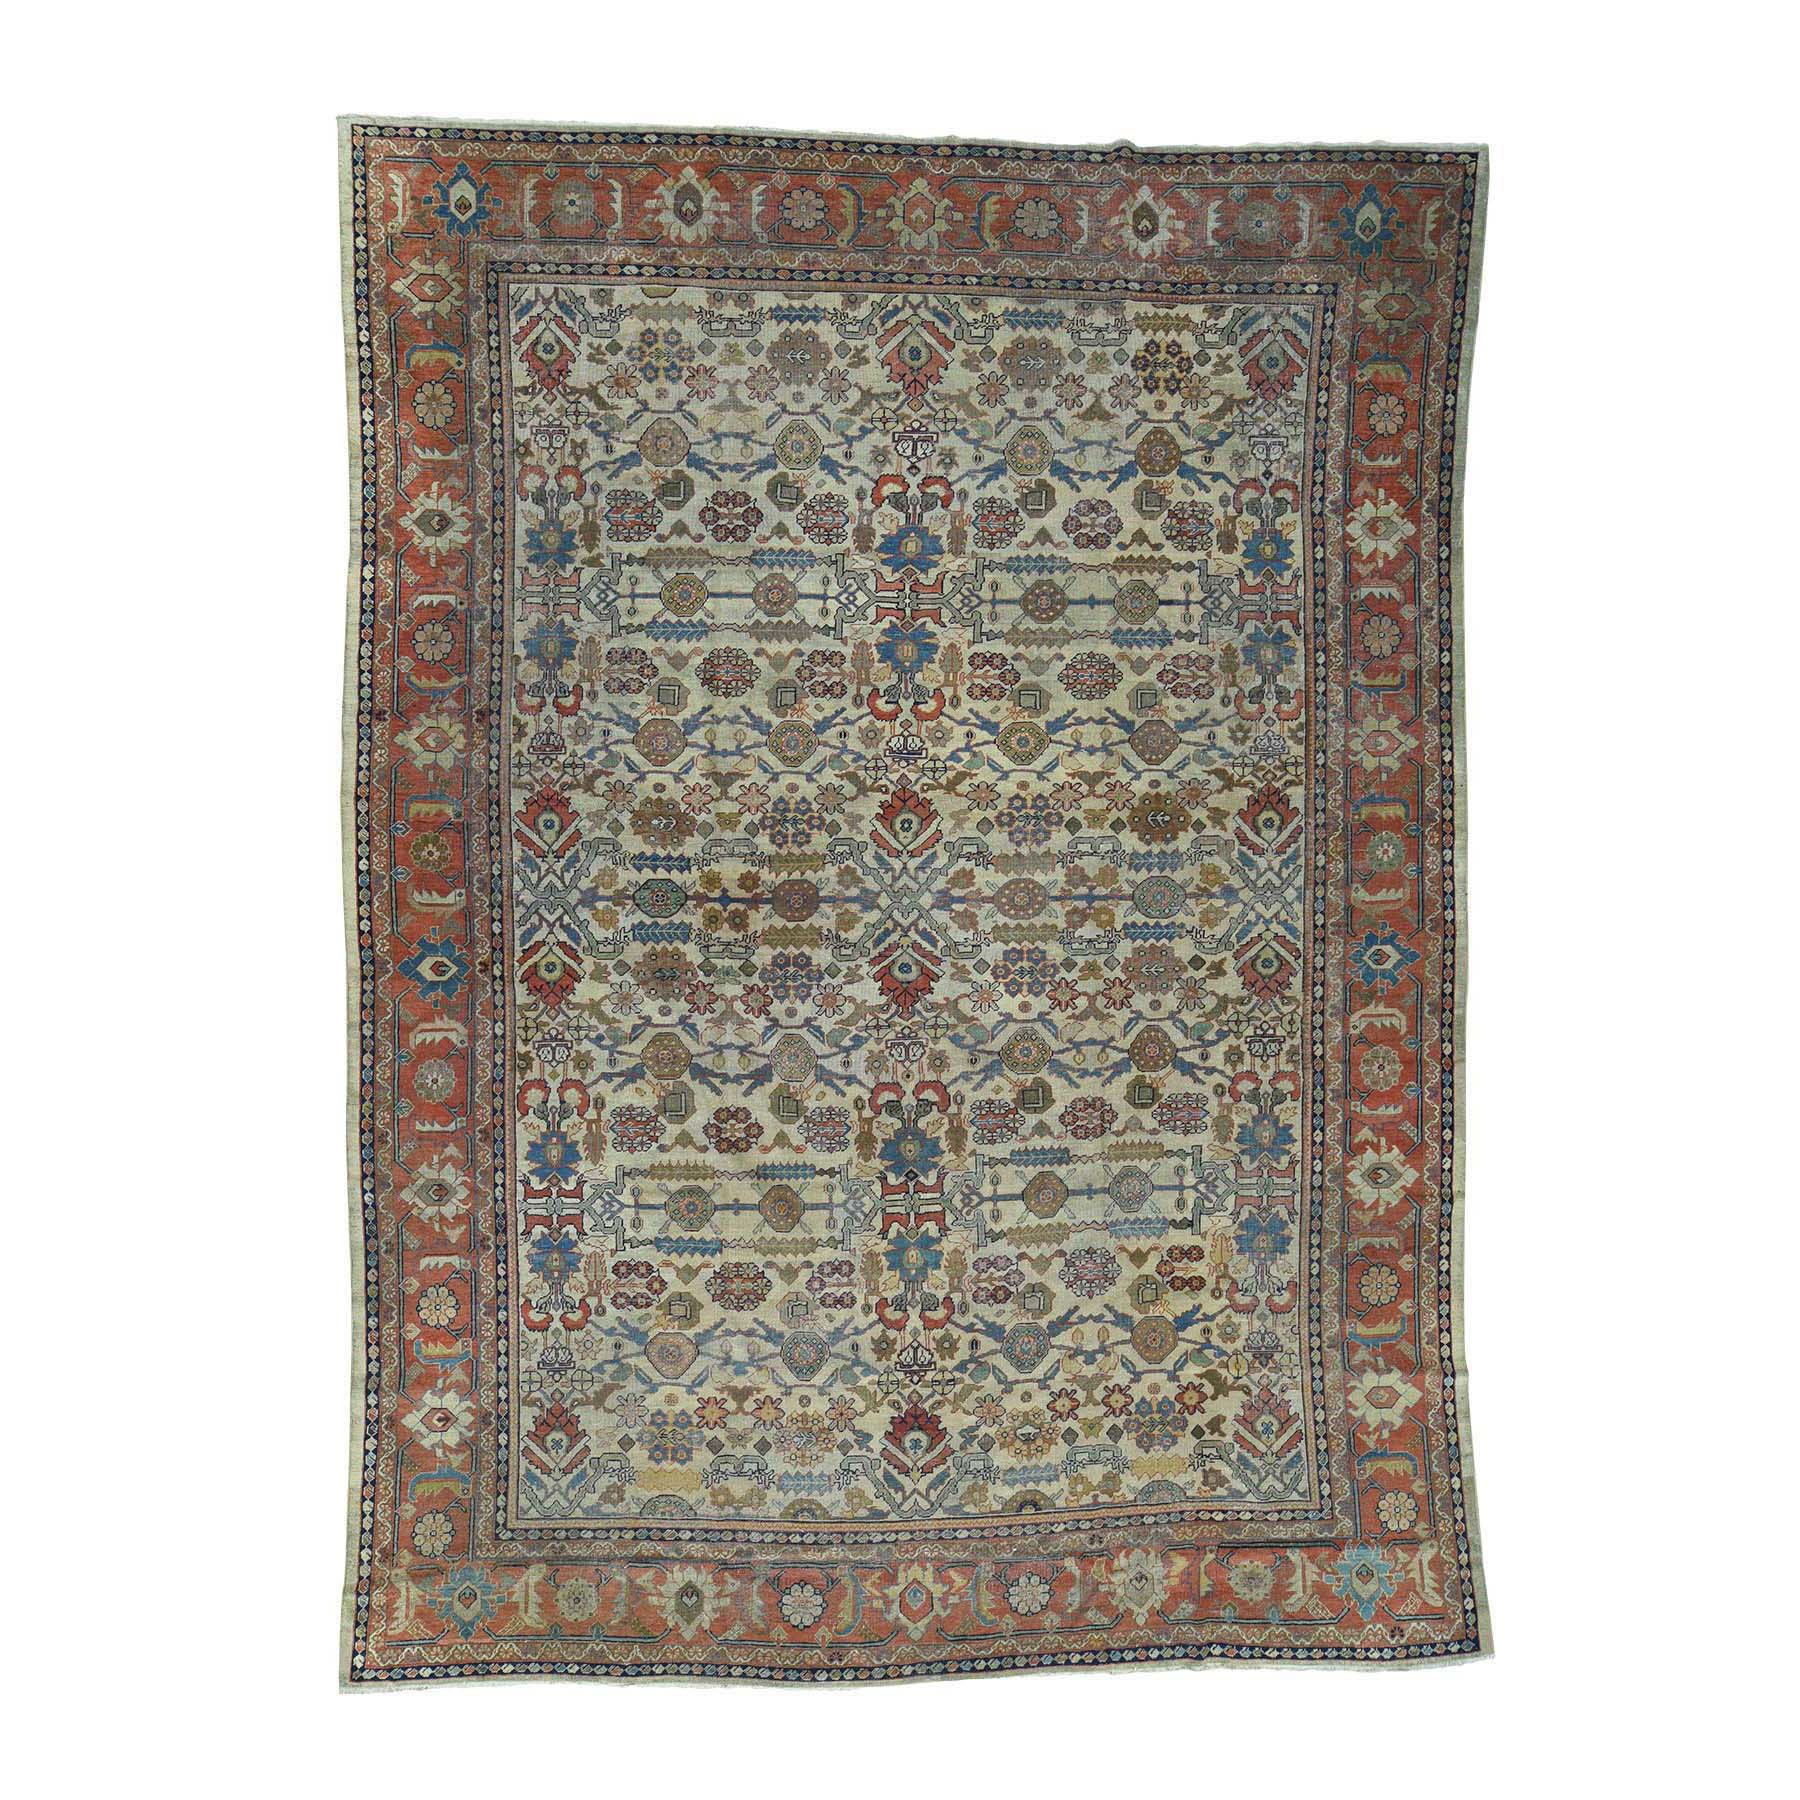 11'x14'8" Antique Persian Sultanabad Oversize Even Wear Oriental Rug 